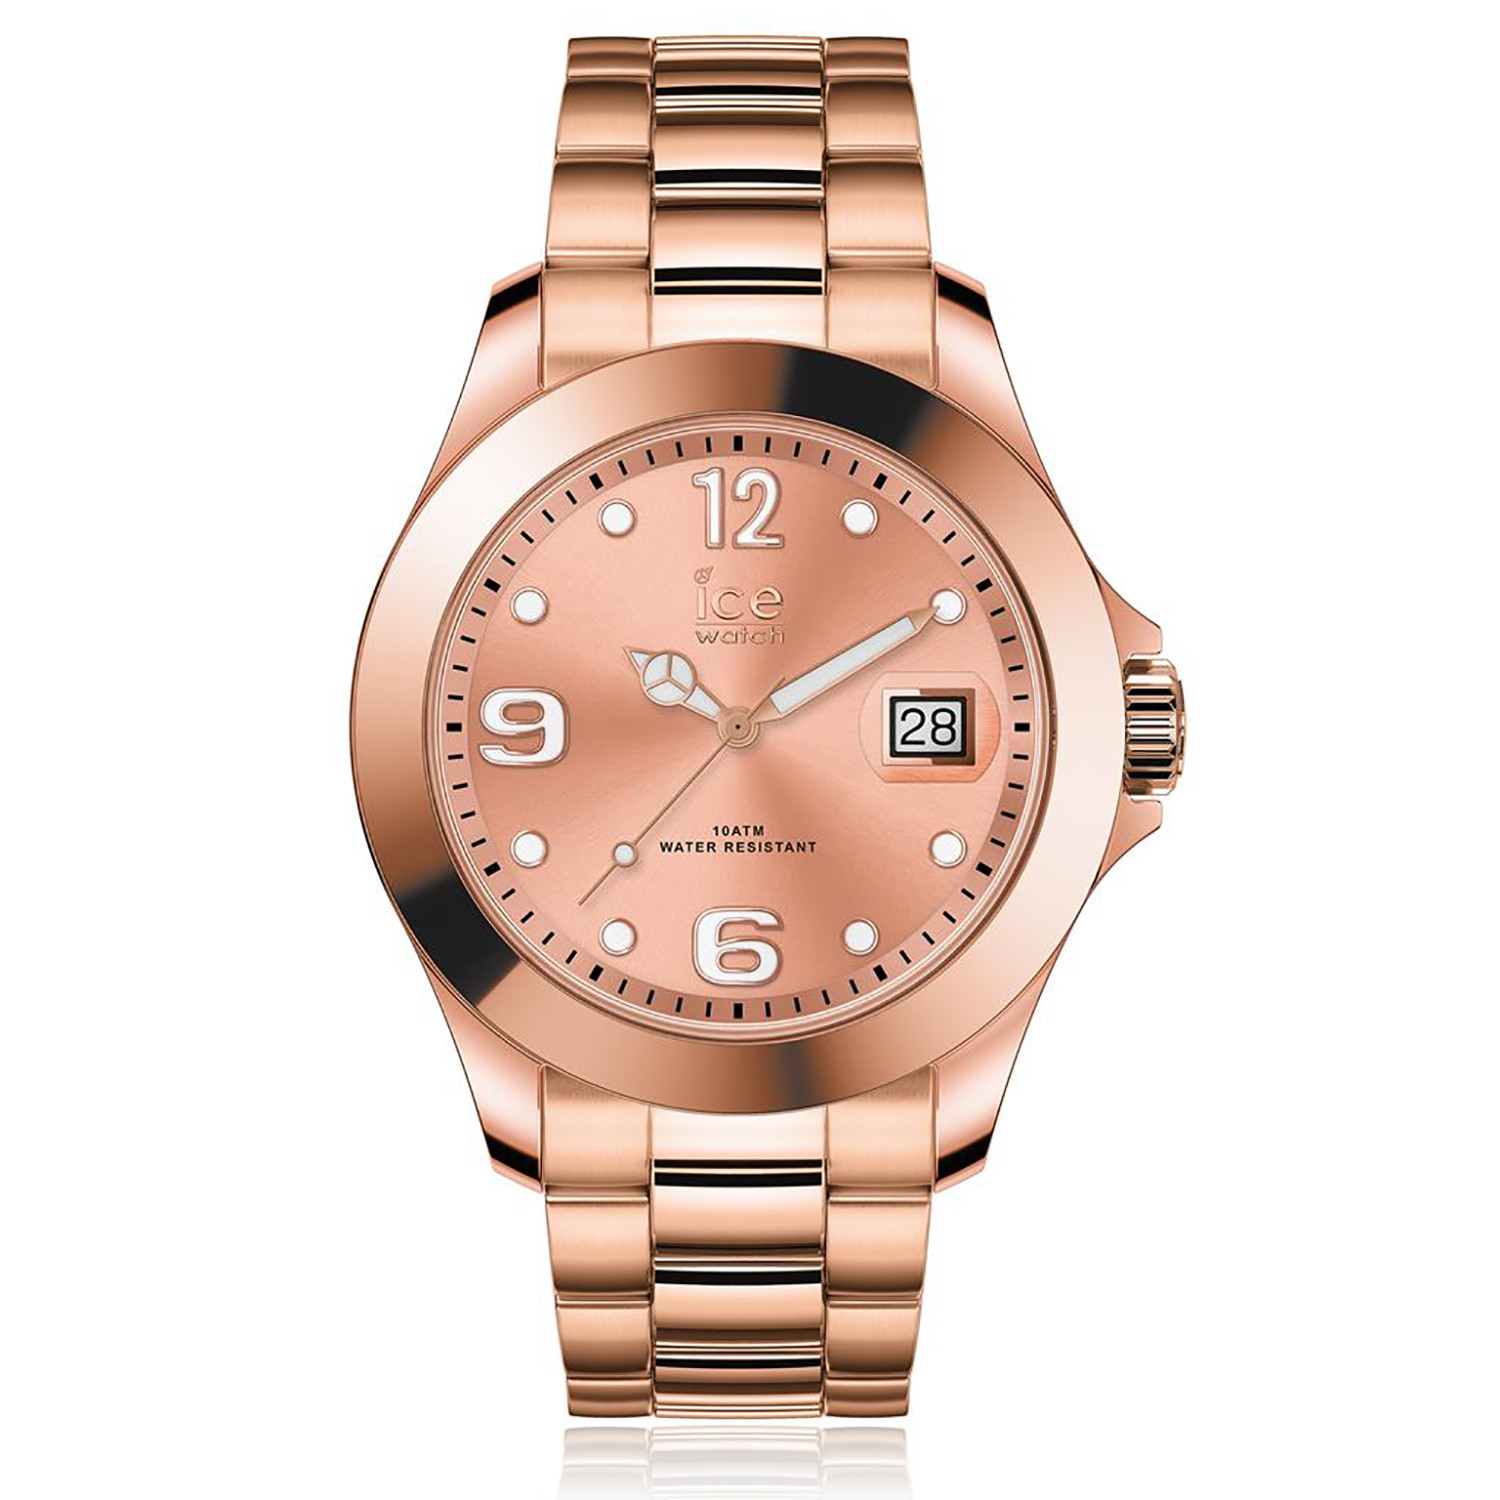 Montre Ice Watch steel classic rose-gold small